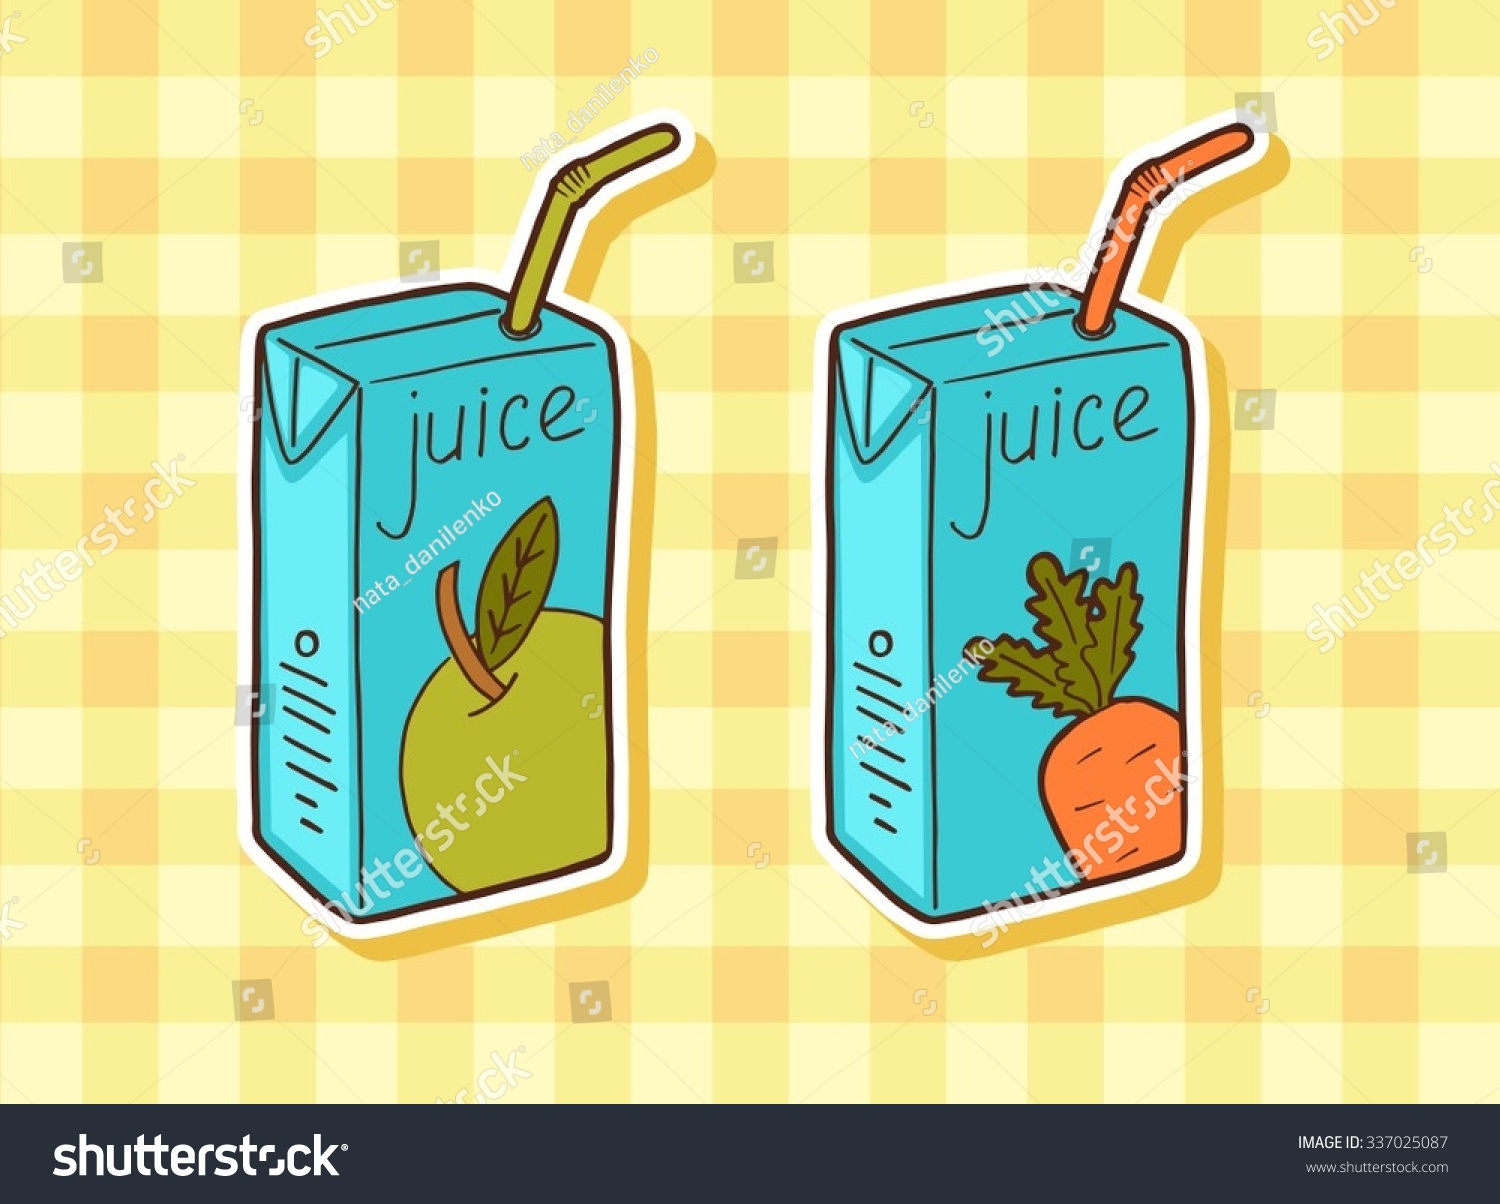 SVG of pack of juice with drinking straw svg